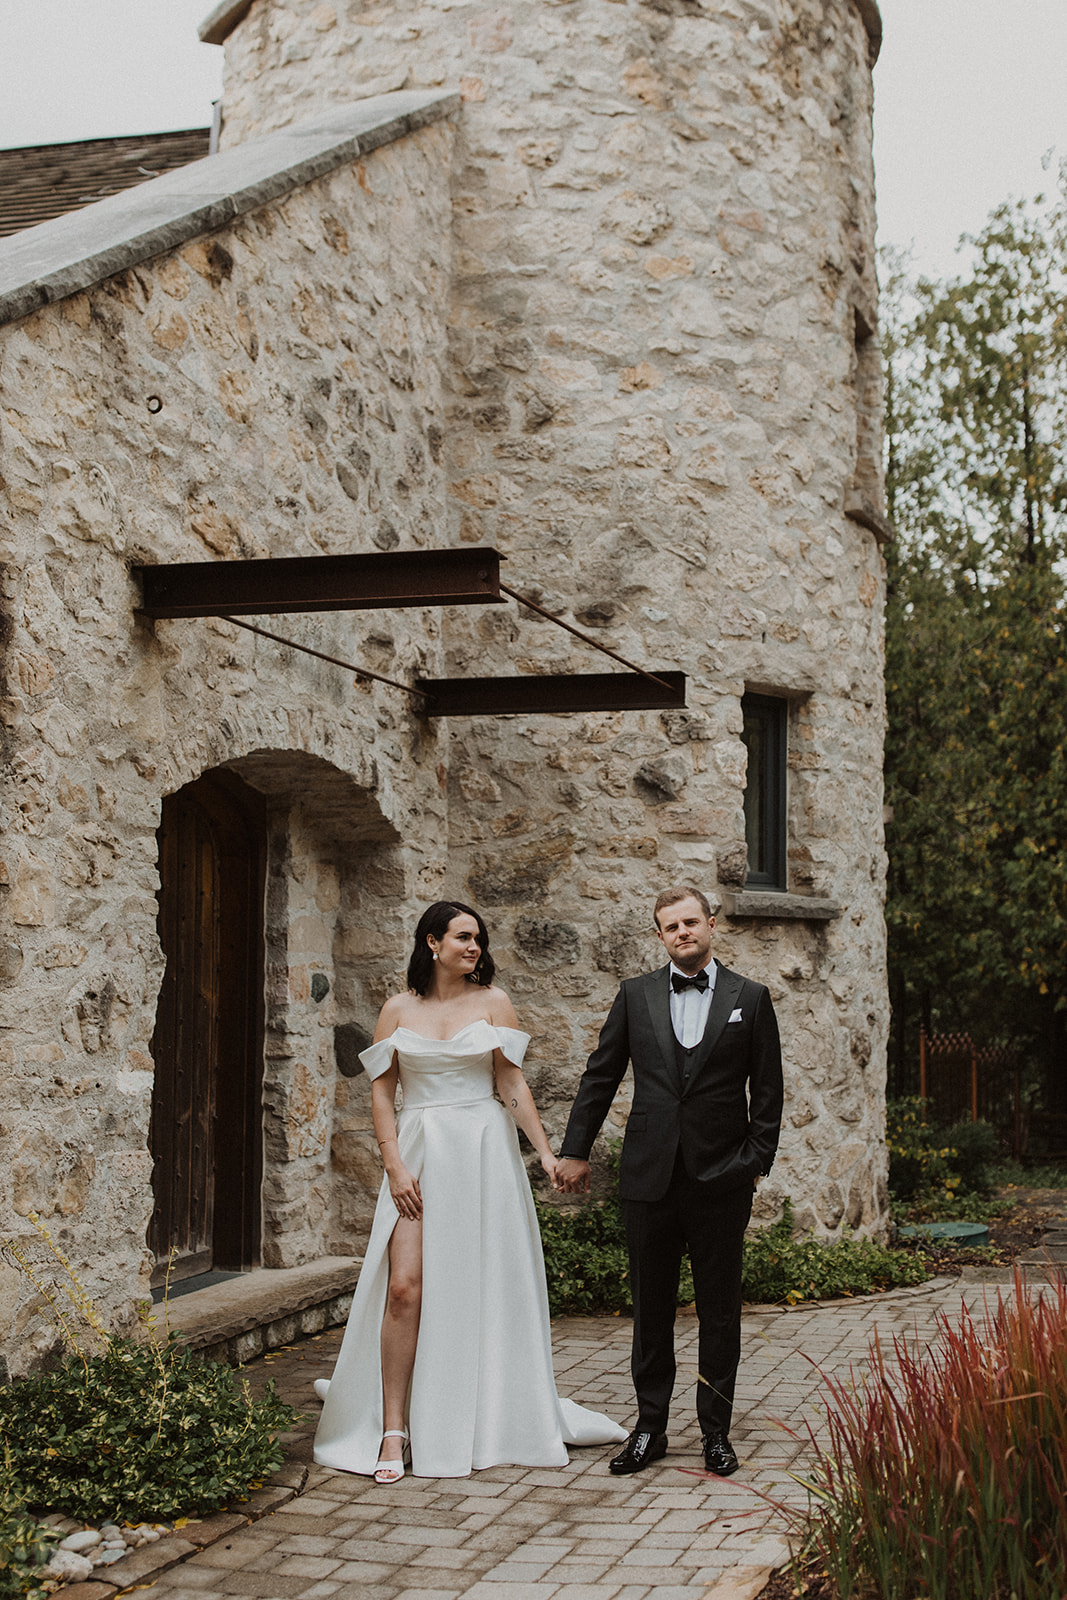 A couple say their vows in the small town of Elora amongst beautiful stone buildings.